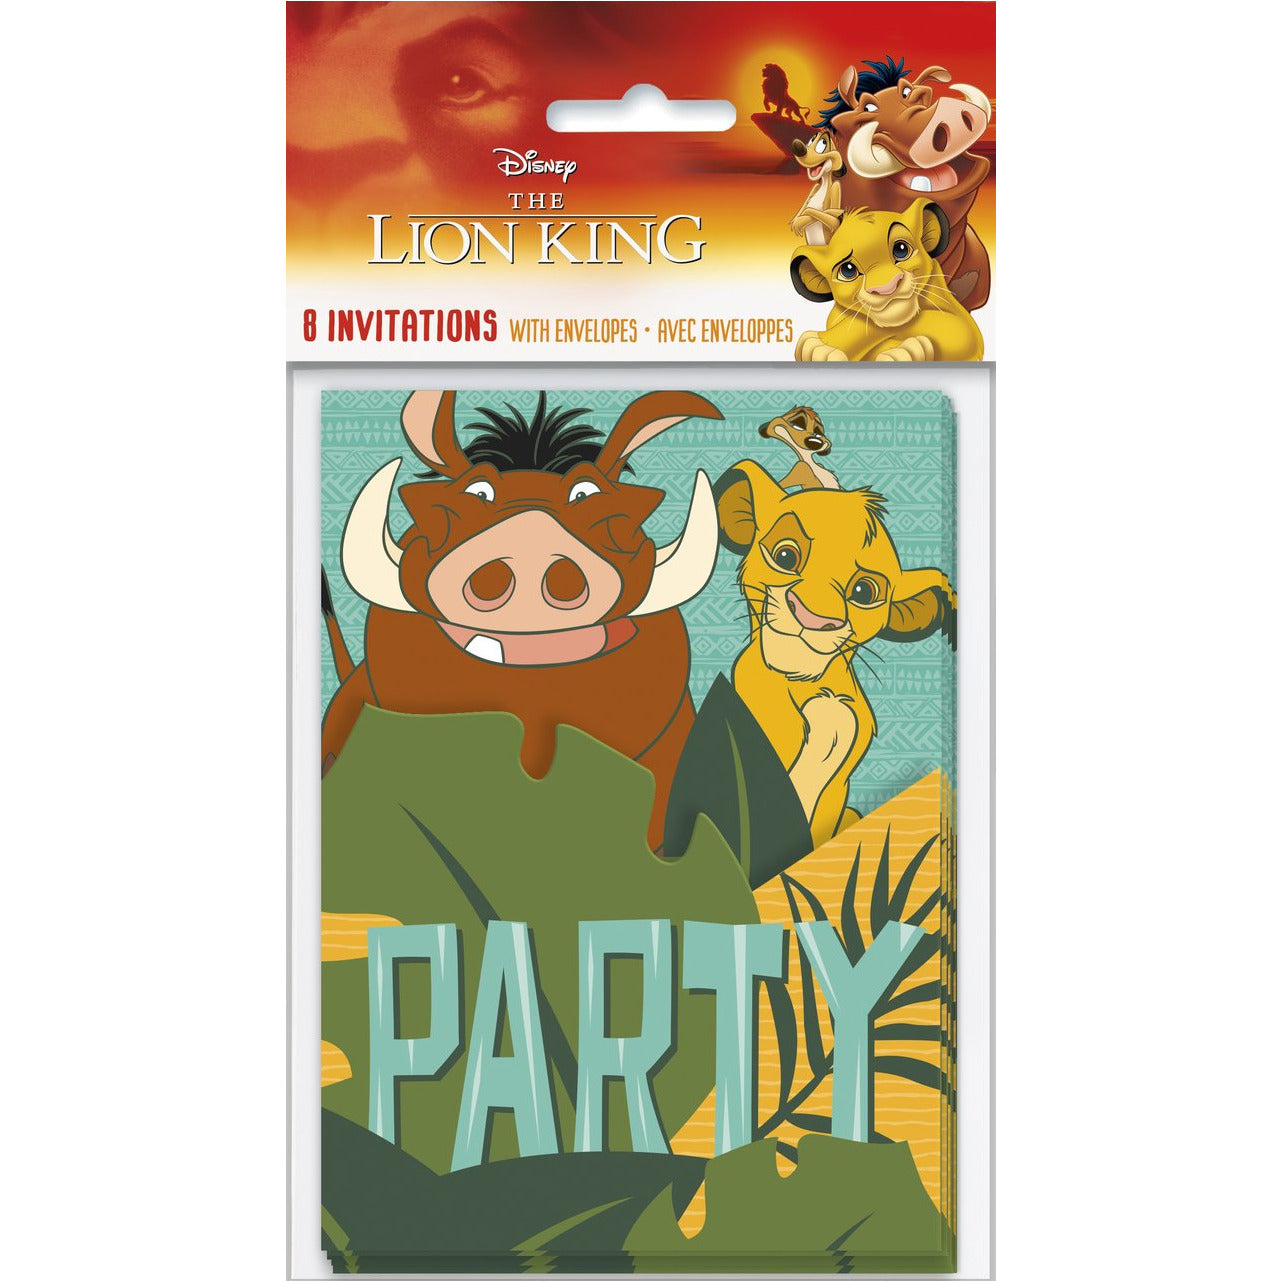 The Lion King Birthday Get together Invites [8 Per Package]